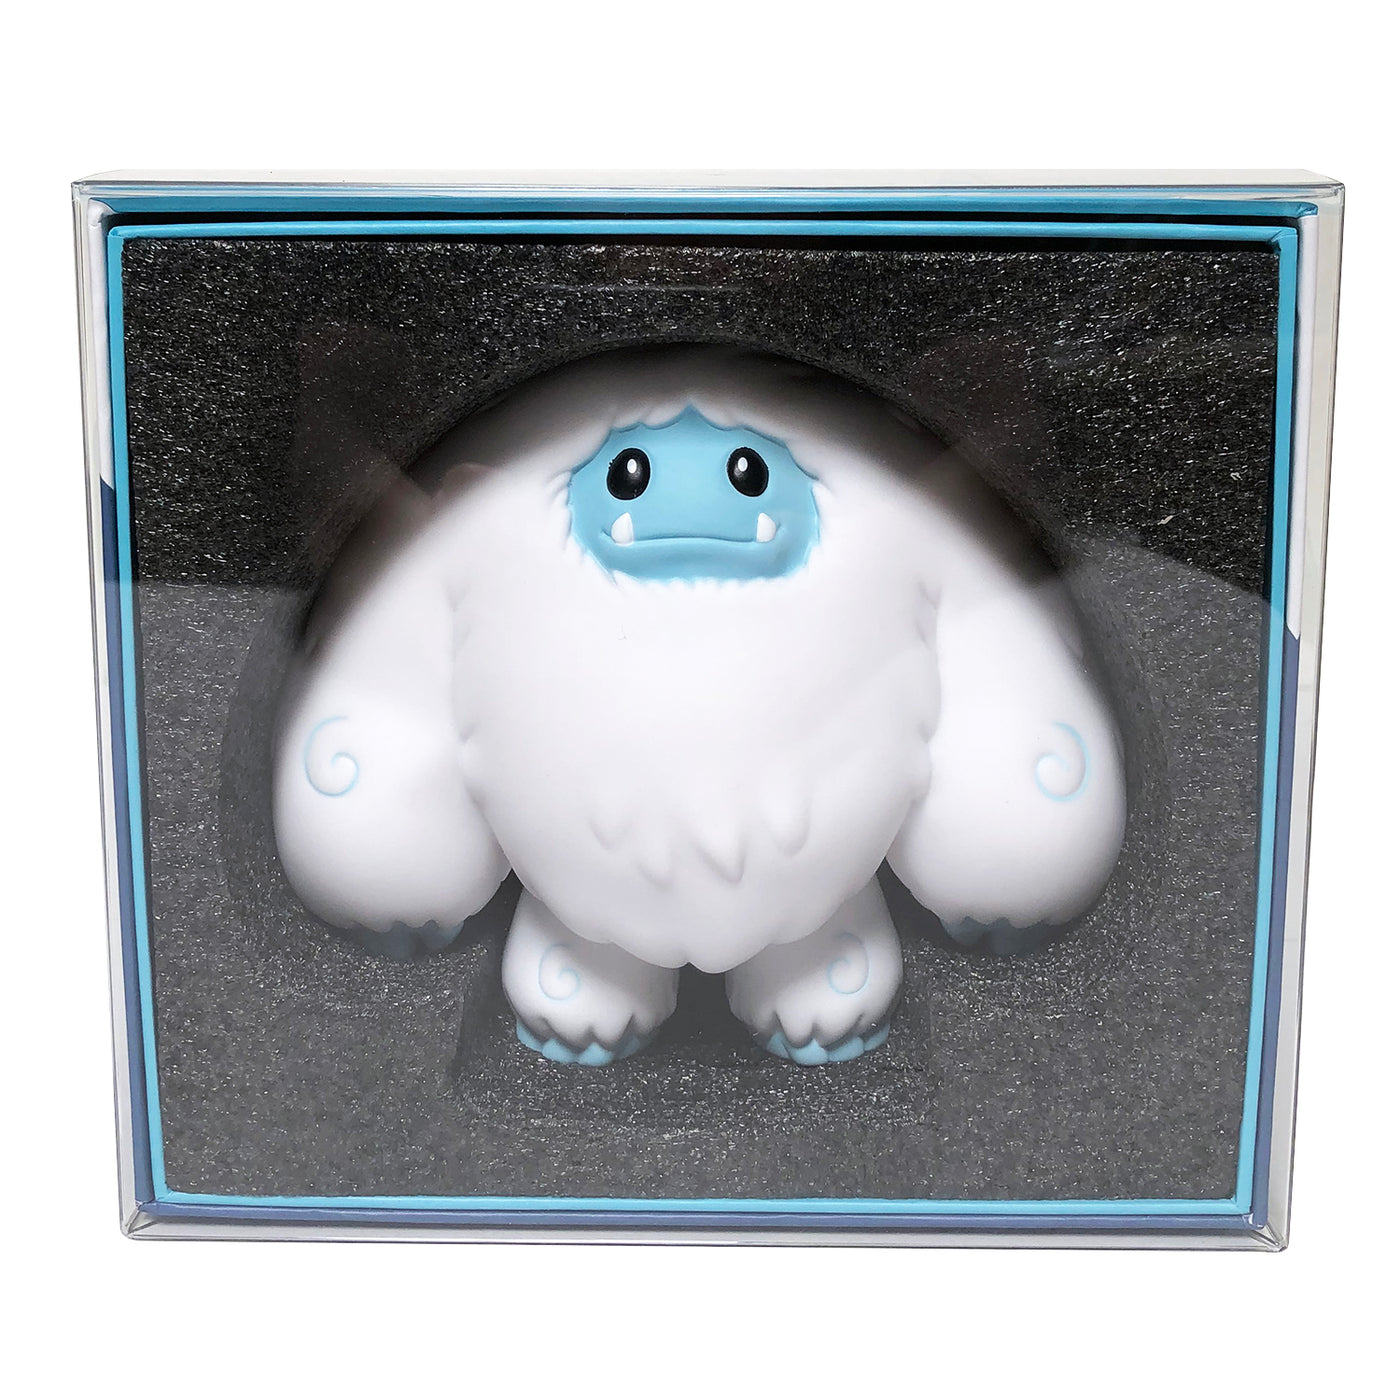 ABOMINABLE TOYS Chomp Protectors for Chomp Vinyl Collectible Figures, 50mm thick